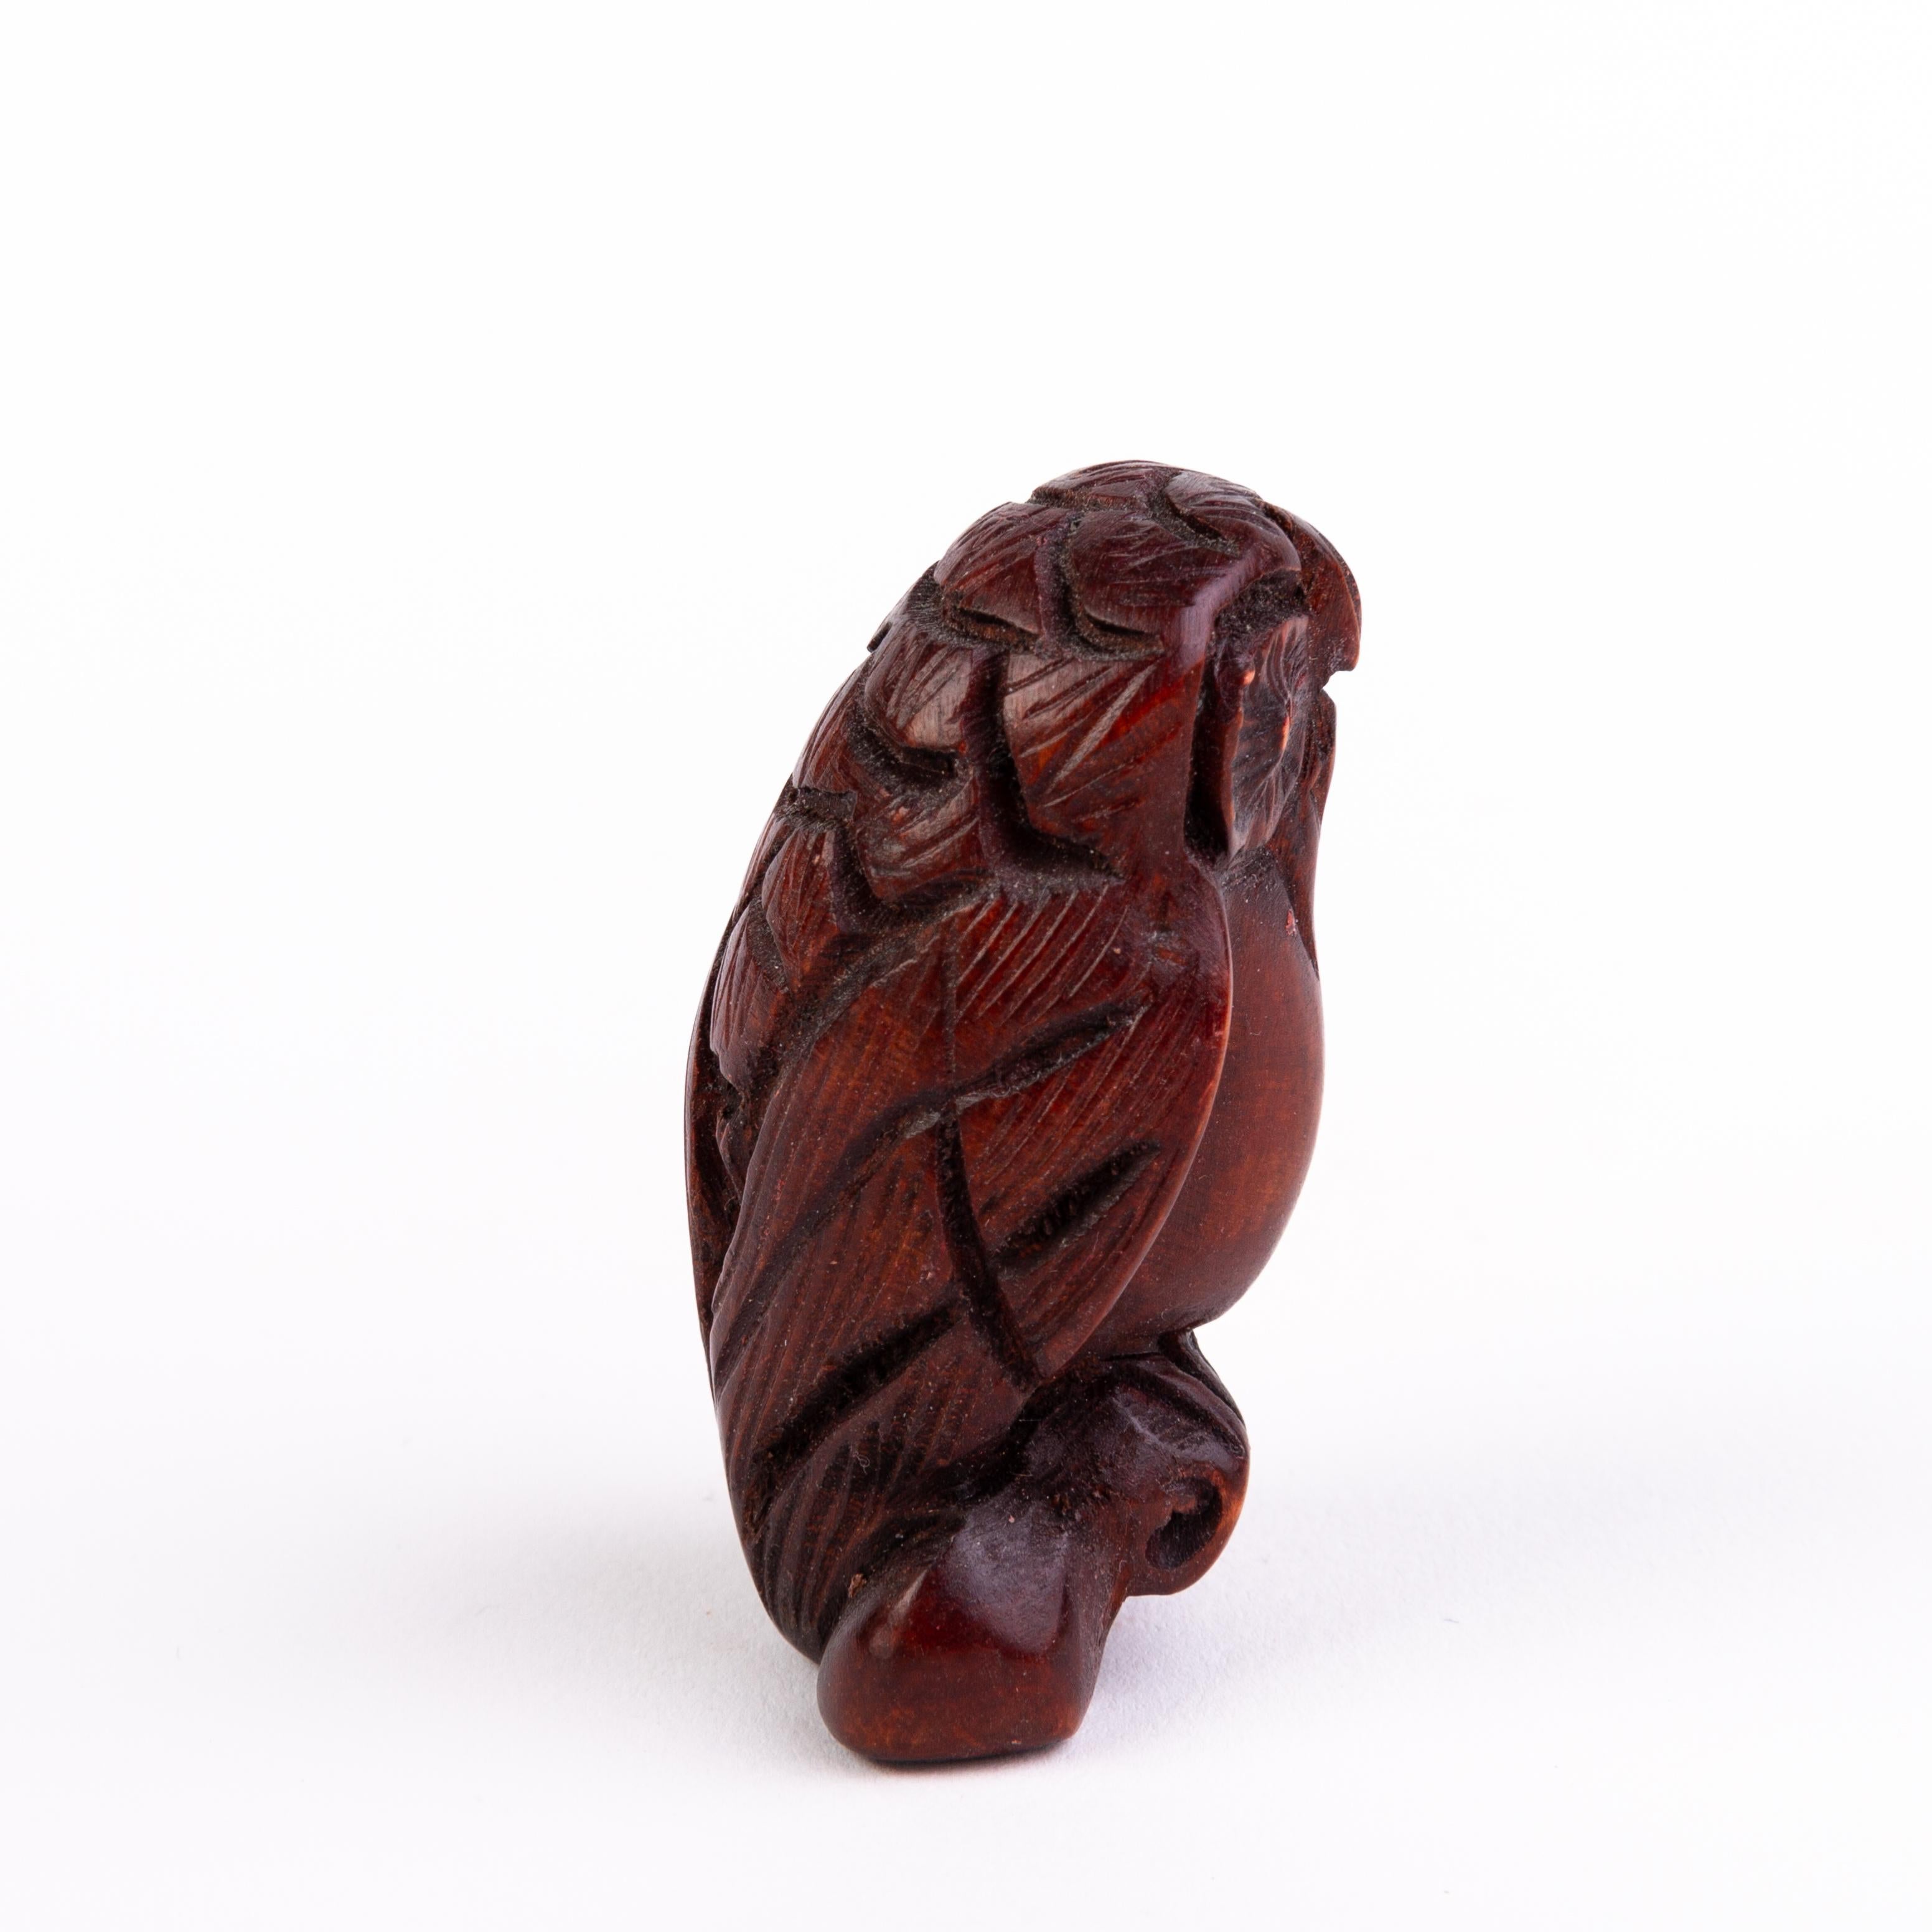 In good condition
From a private collection
Free international shipping
Japanese Carved Boxwood Netsuke Inro of an Owl